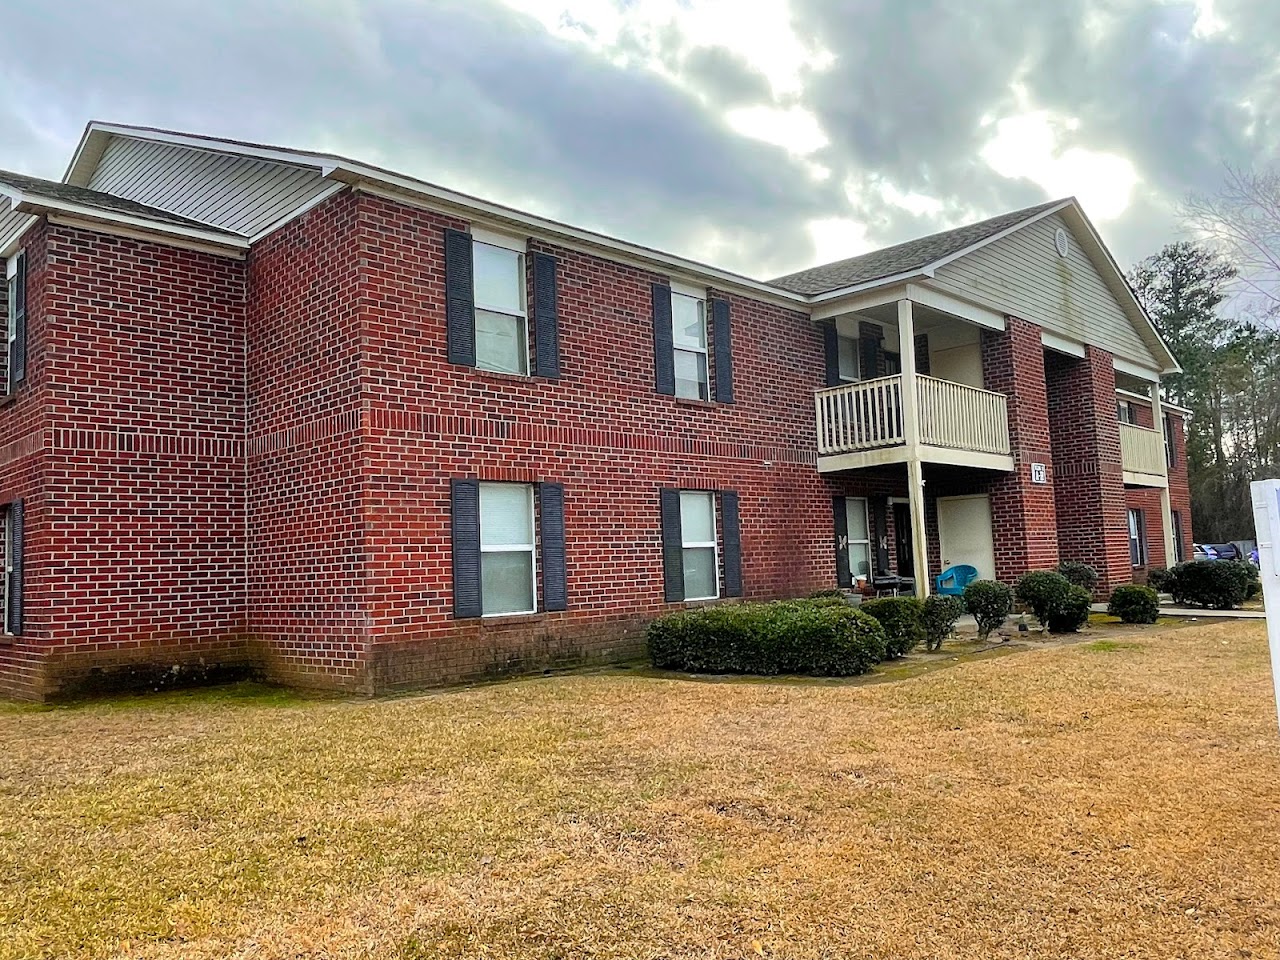 Photo of BREWINGTON POINTE APTS. Affordable housing located at 312 SCOTT ST BREWTON, AL 36426